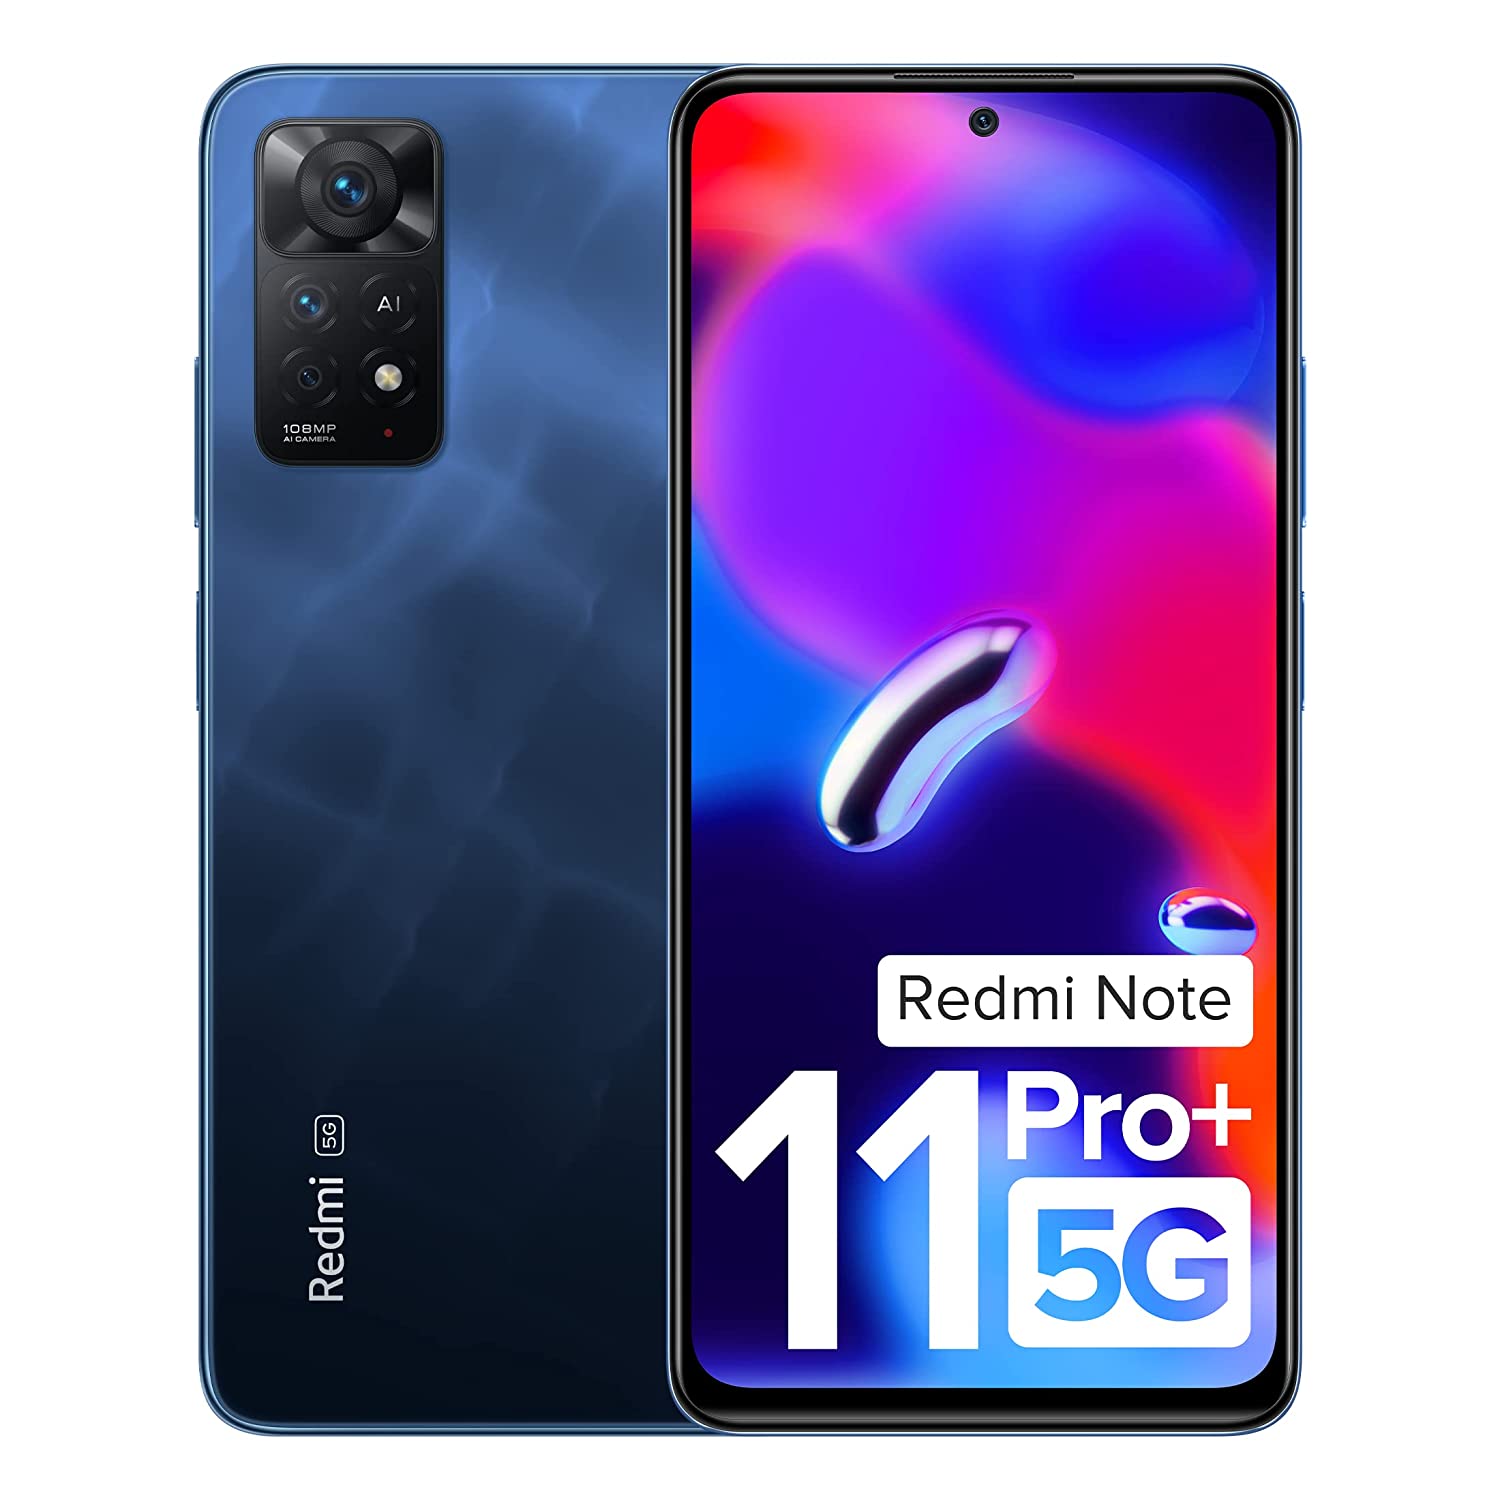 Redmi Note 11 Pro + 5G (Mirage Blue, 8GB RAM, 256GB Storage) | 67W Turbo Charge | 120Hz Super AMOLED Display | Additional Exchange Offers Available | Charger Included